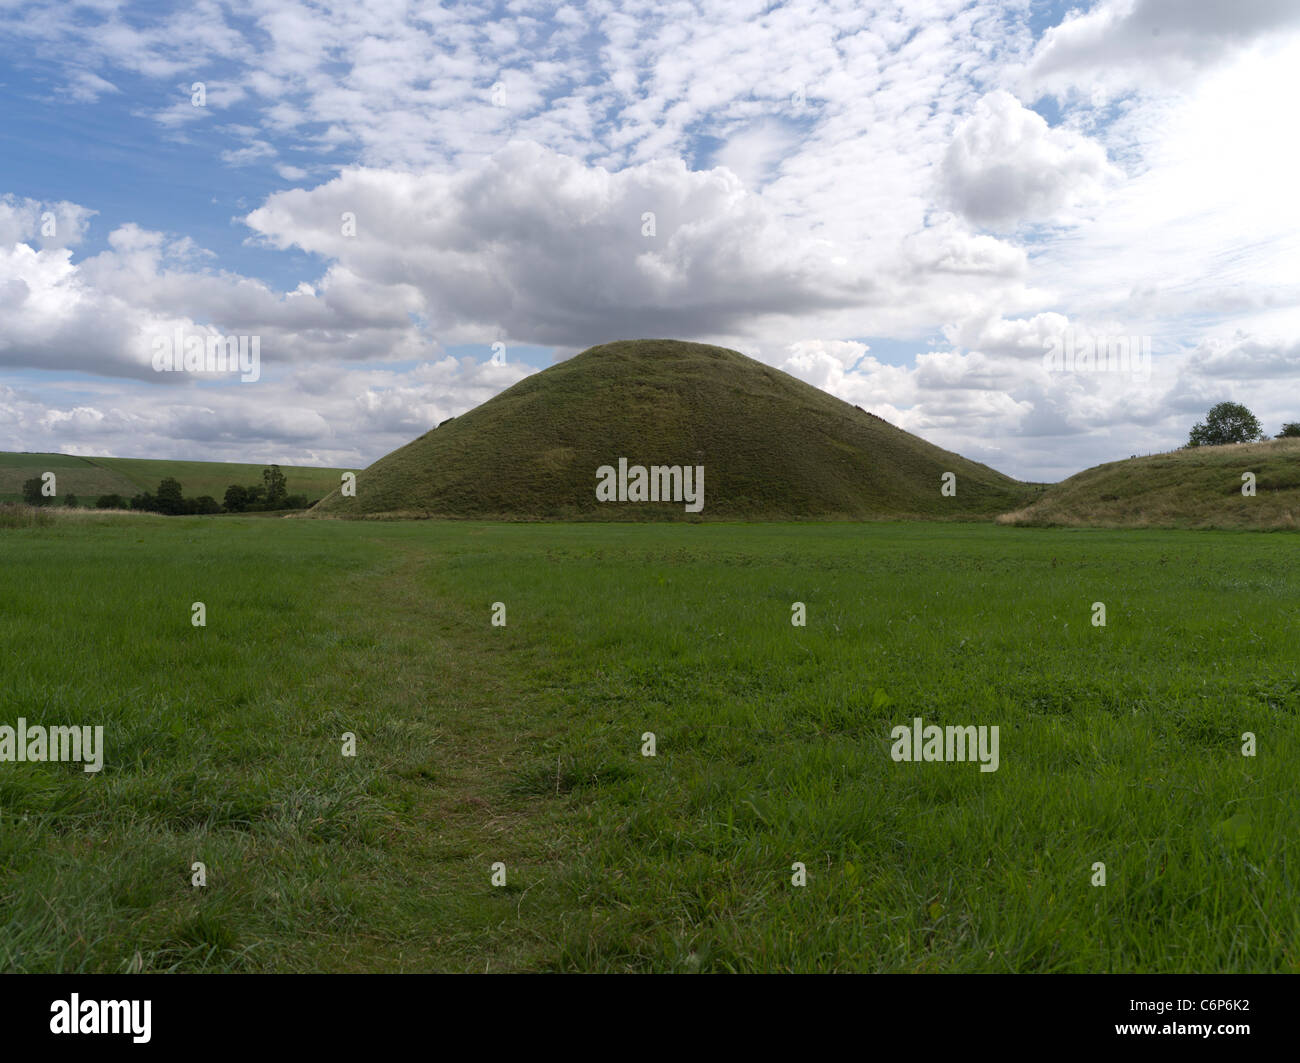 dh Silbury Hill WEST KENNETT WILTSHIRE Neolithic prehistoric mound historic monument world heritage uk bronze age burial site england Stock Photo